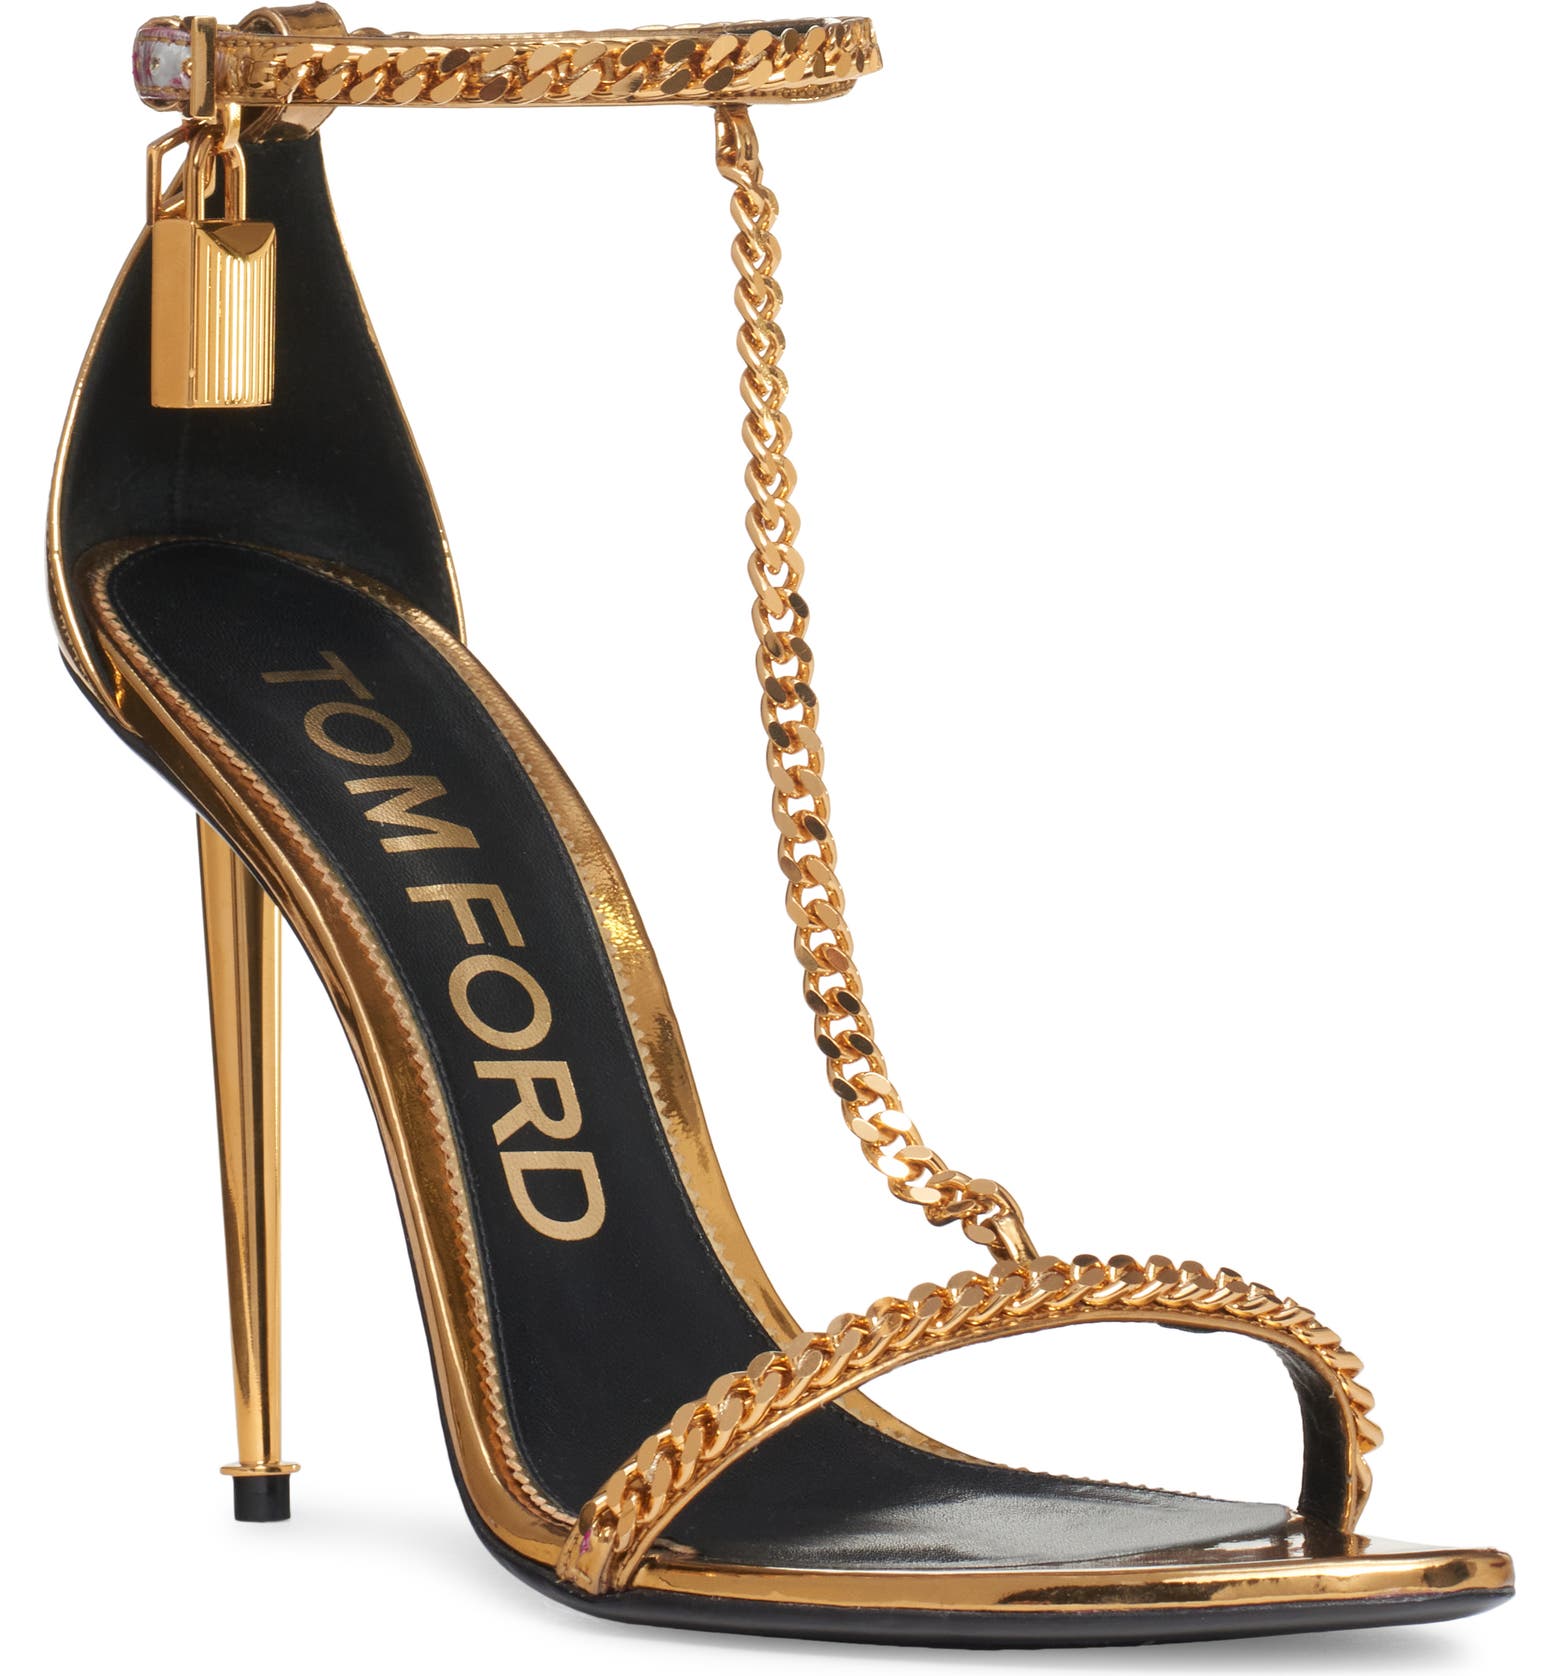 Tom Ford gold heels with chain